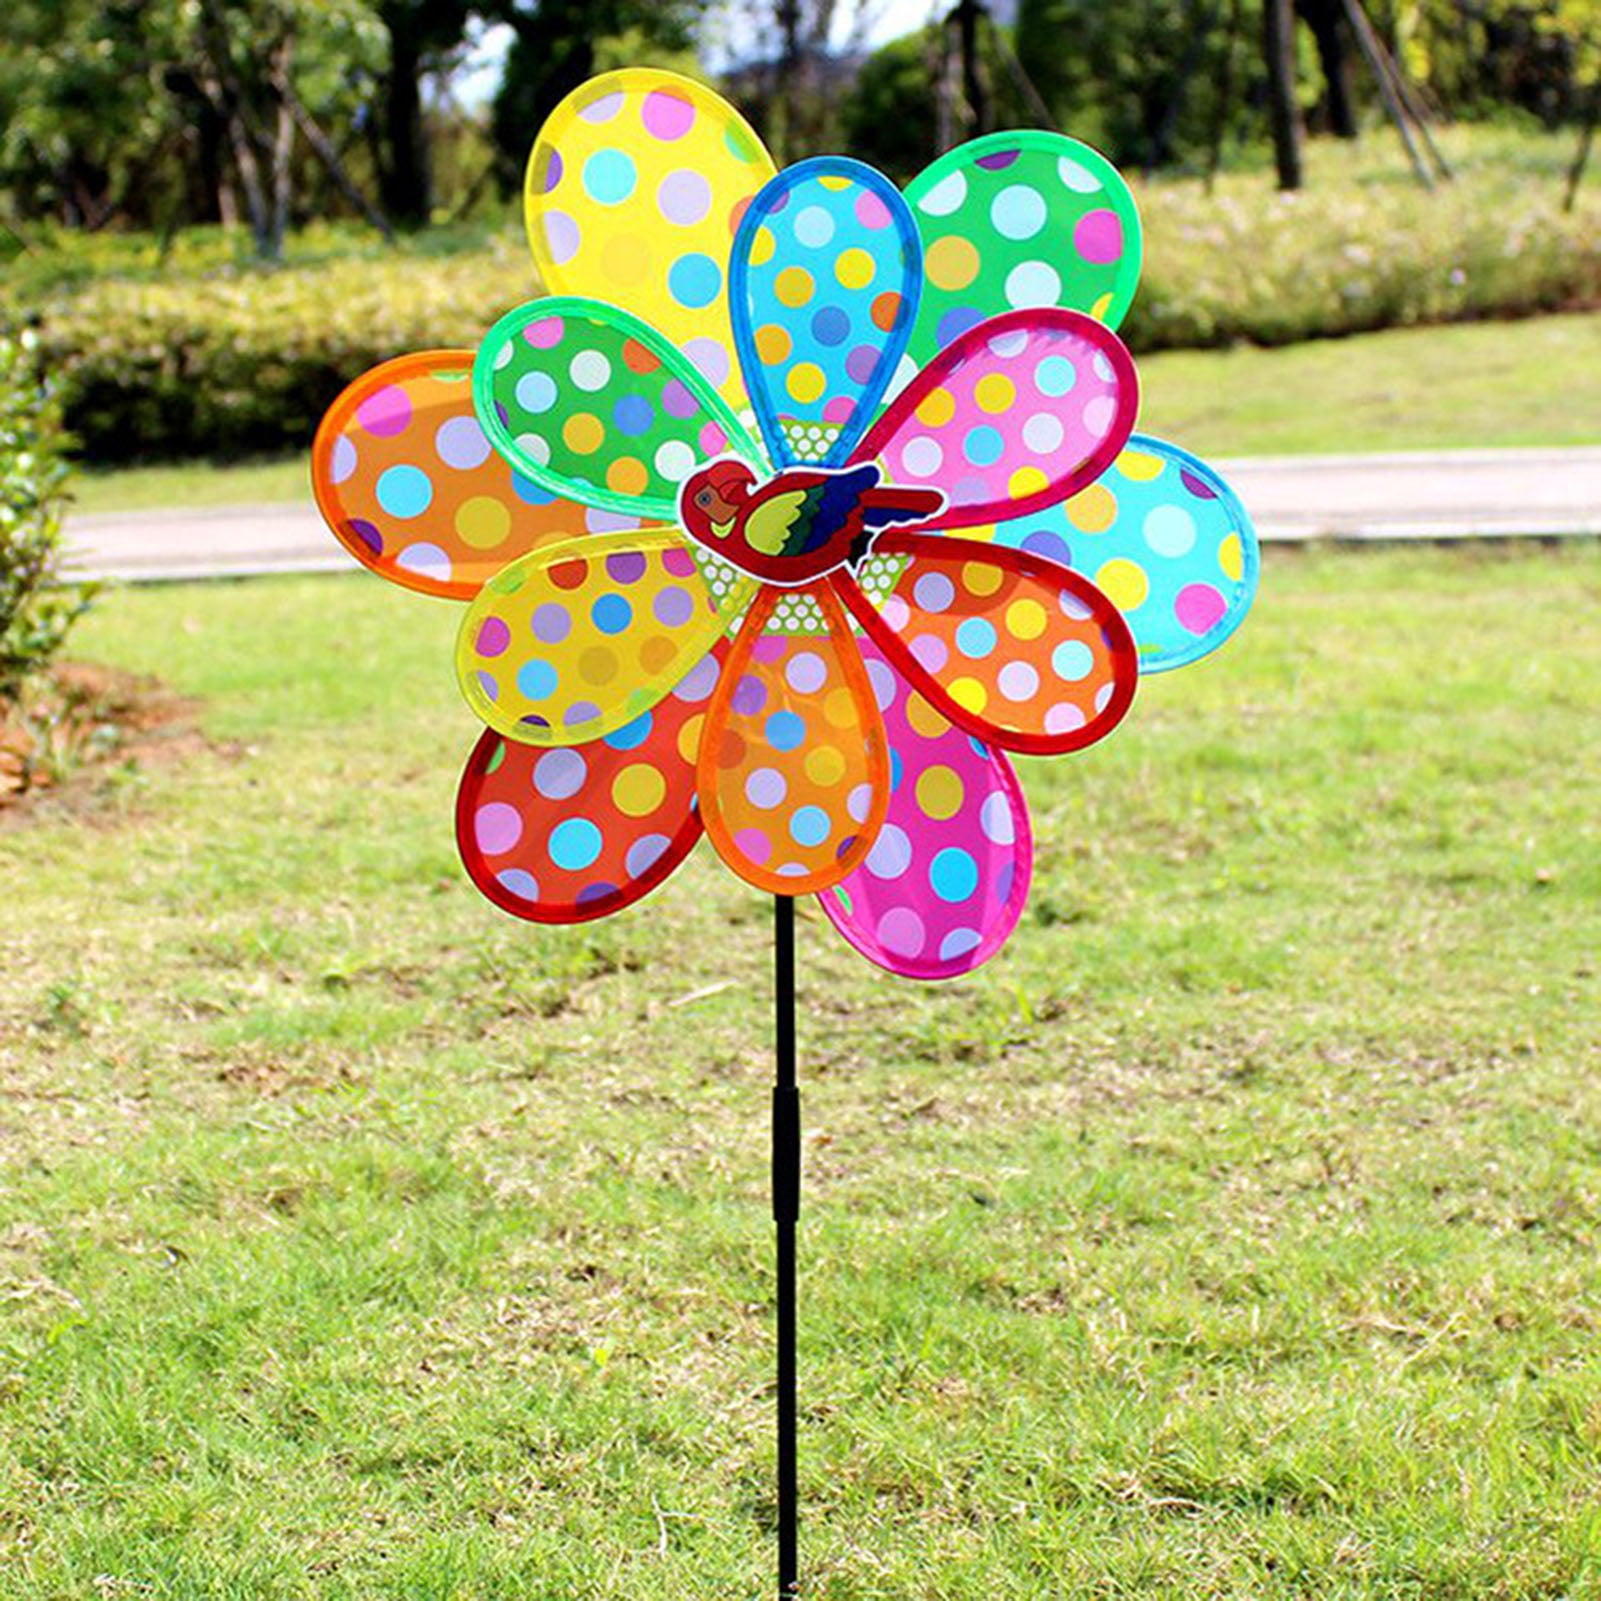 Jiamins Windmill Toys for Children Kids Garden Decoration 8 Leaves Colorful Wind Spinner Outdoors 